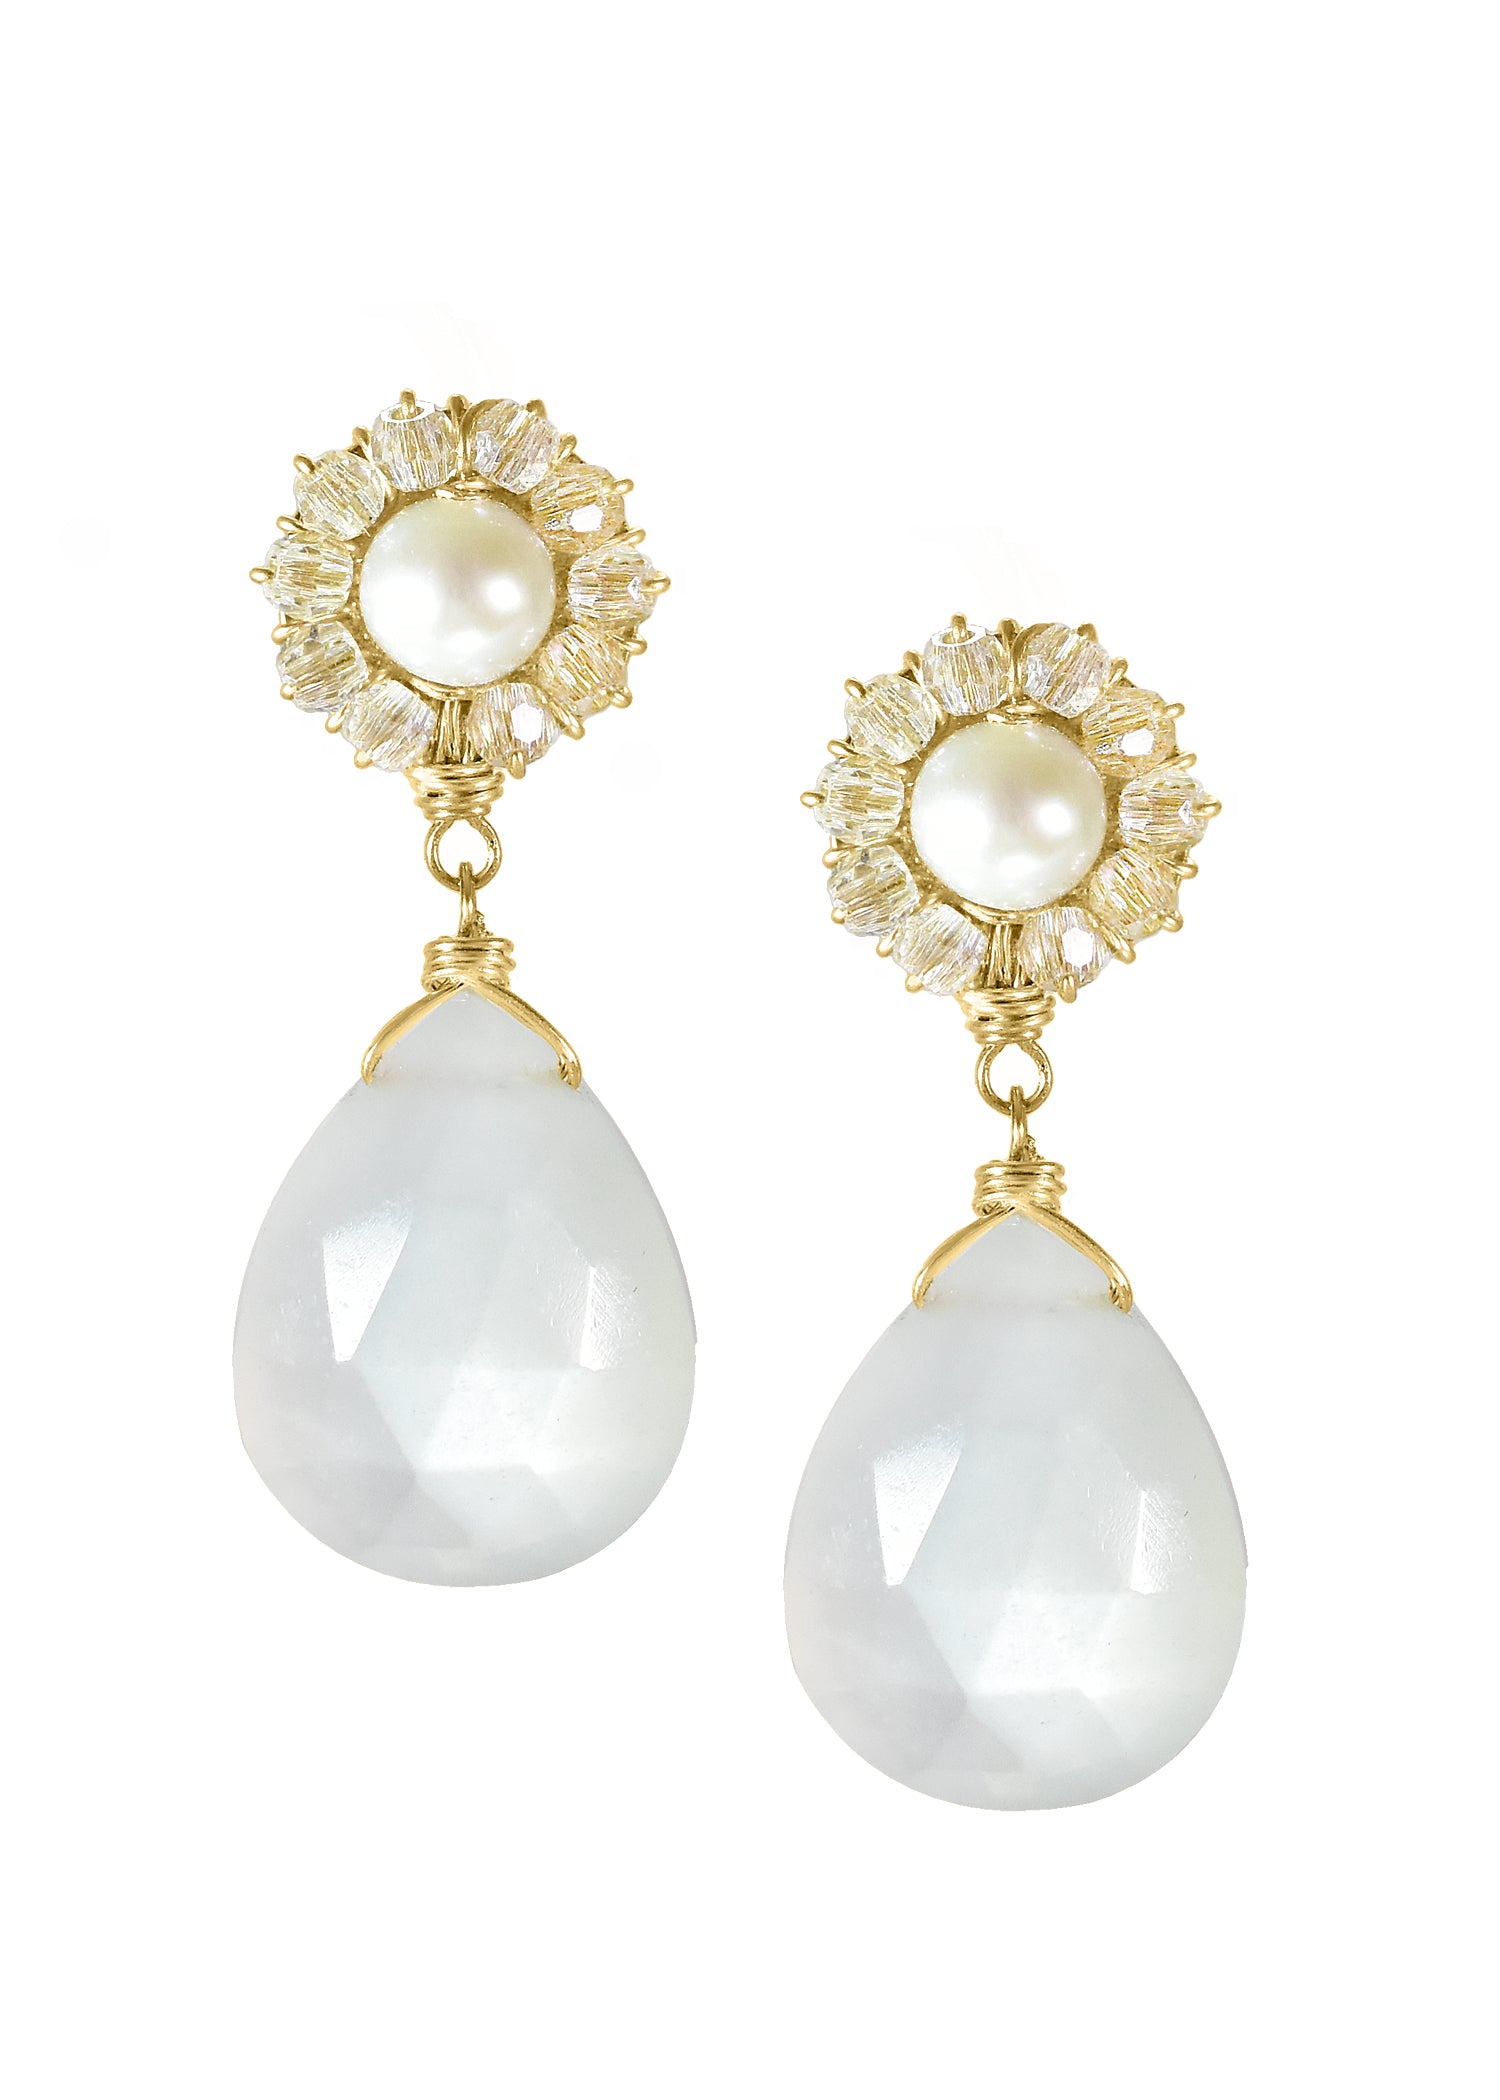 Freshwater pearl Crystal White moonstone 14k gold fill Earrings measure 1" in length (including the posts) and 3/8" in width at the widest point. Posts measure 1/4" in diameter Handmade in our Los Angeles studio